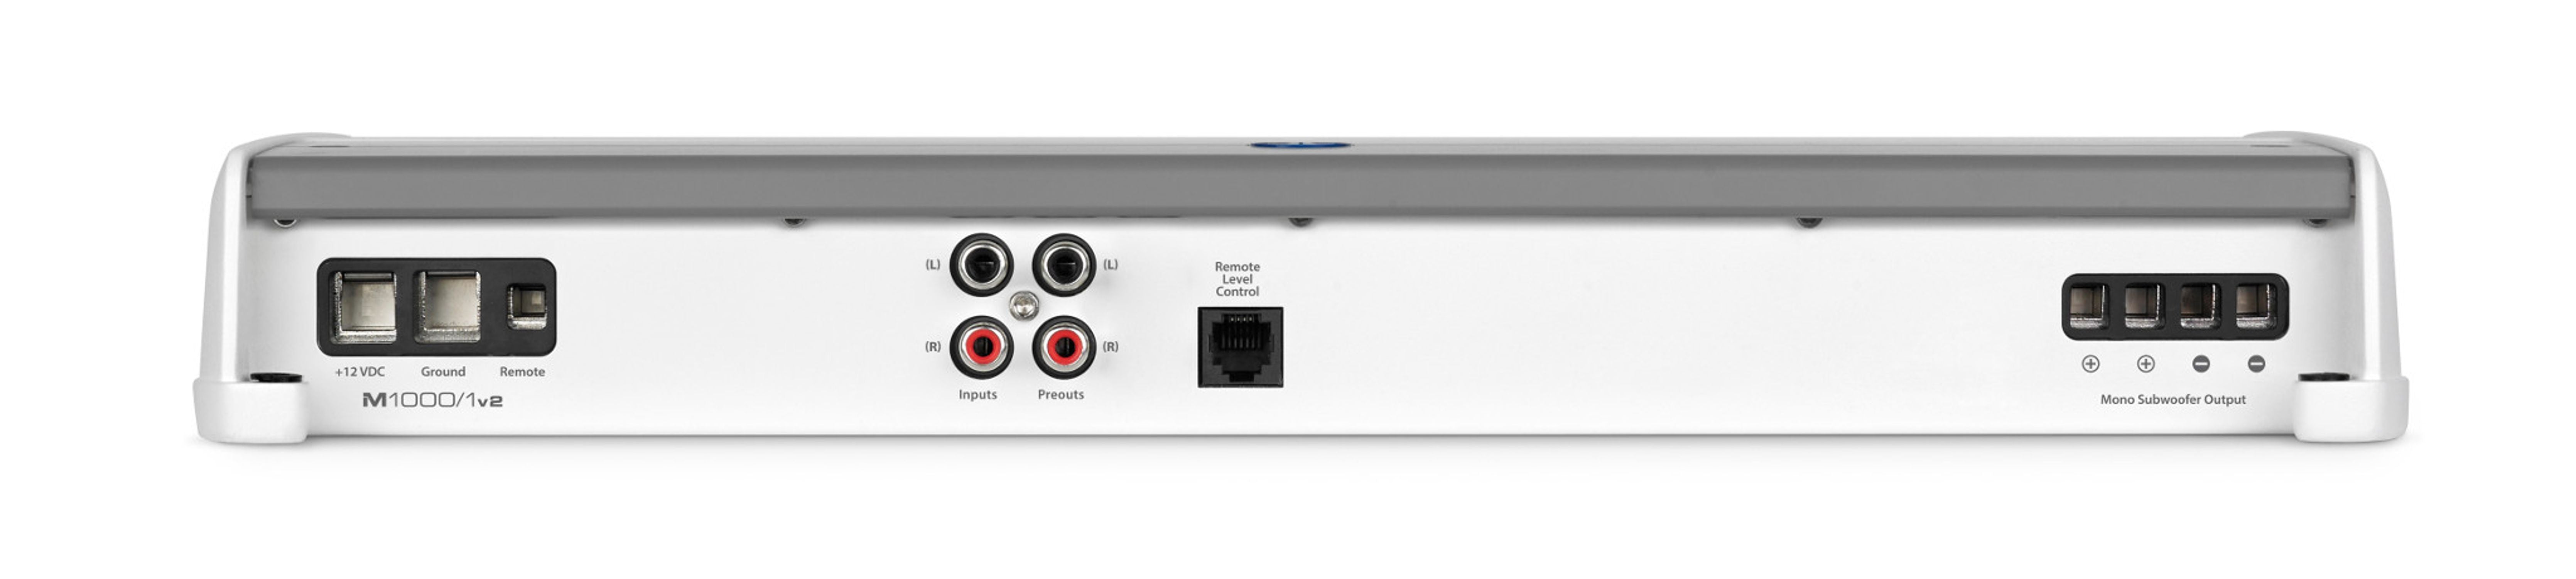 Connection Panel of M1000/1v2 Amplifier with Control Panel Cover on